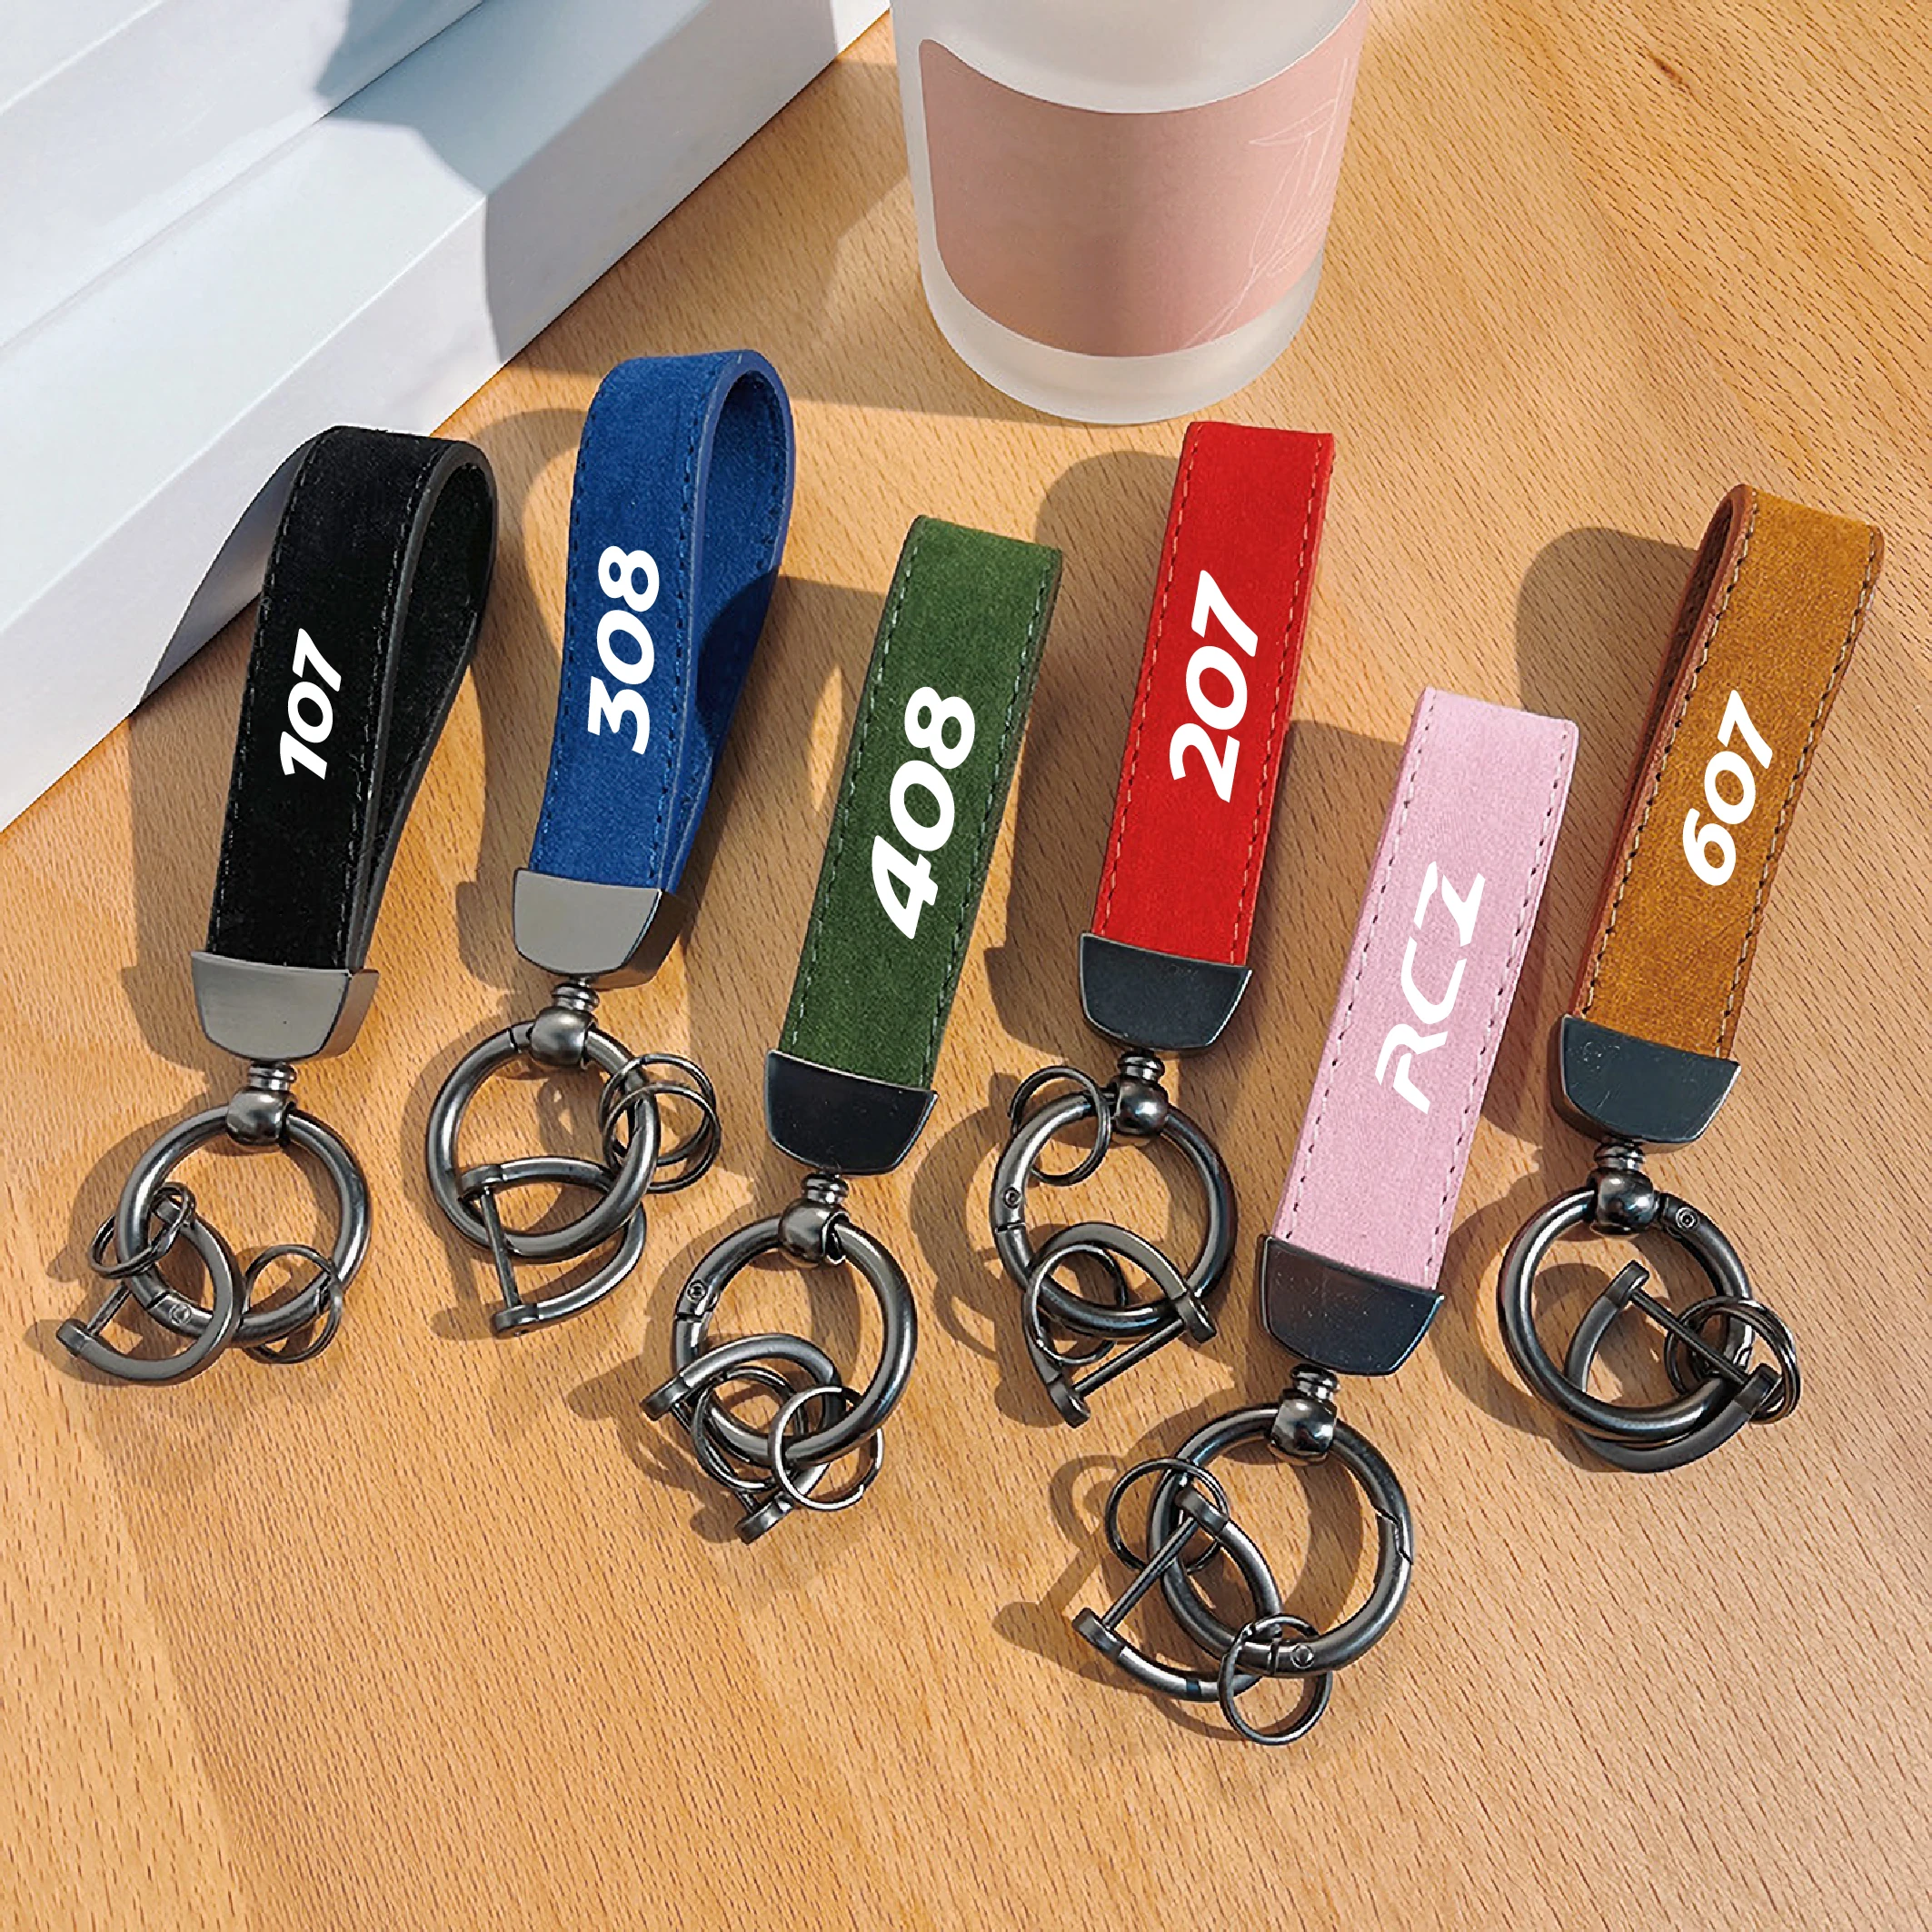 

Luxury Leather Keychain Car KeyRing Apply for Peugeot 107 206 208 308 307 207 208 407 508 2008 3008 4008 5008 Auto Accessories